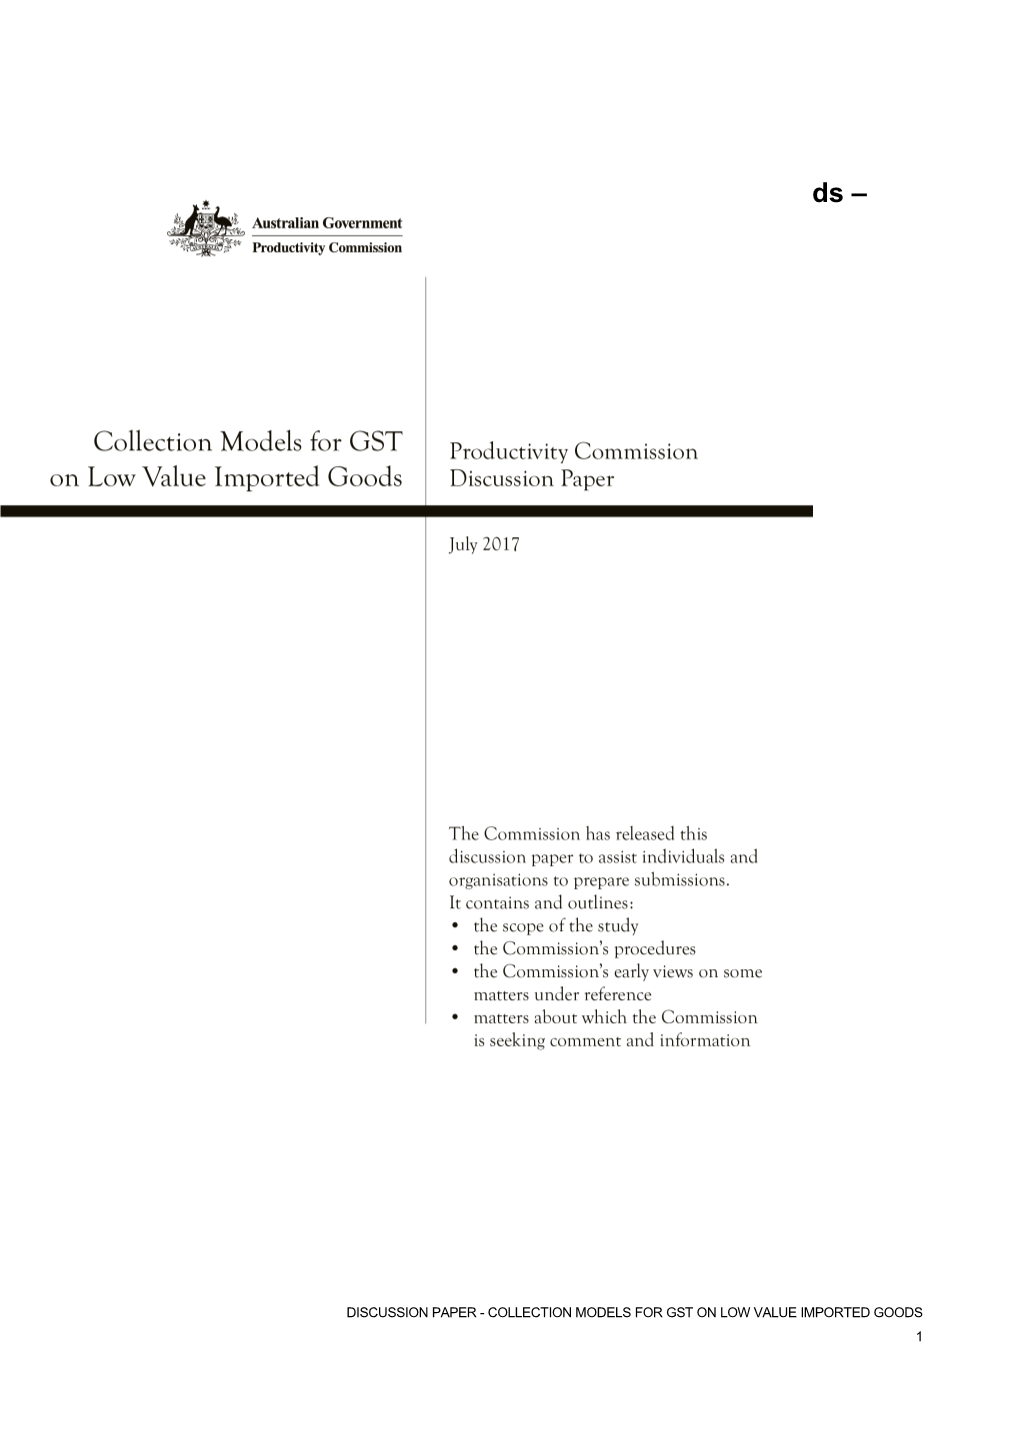 Discussion Paper - Collection Models for GST on Low Value Imported Goods